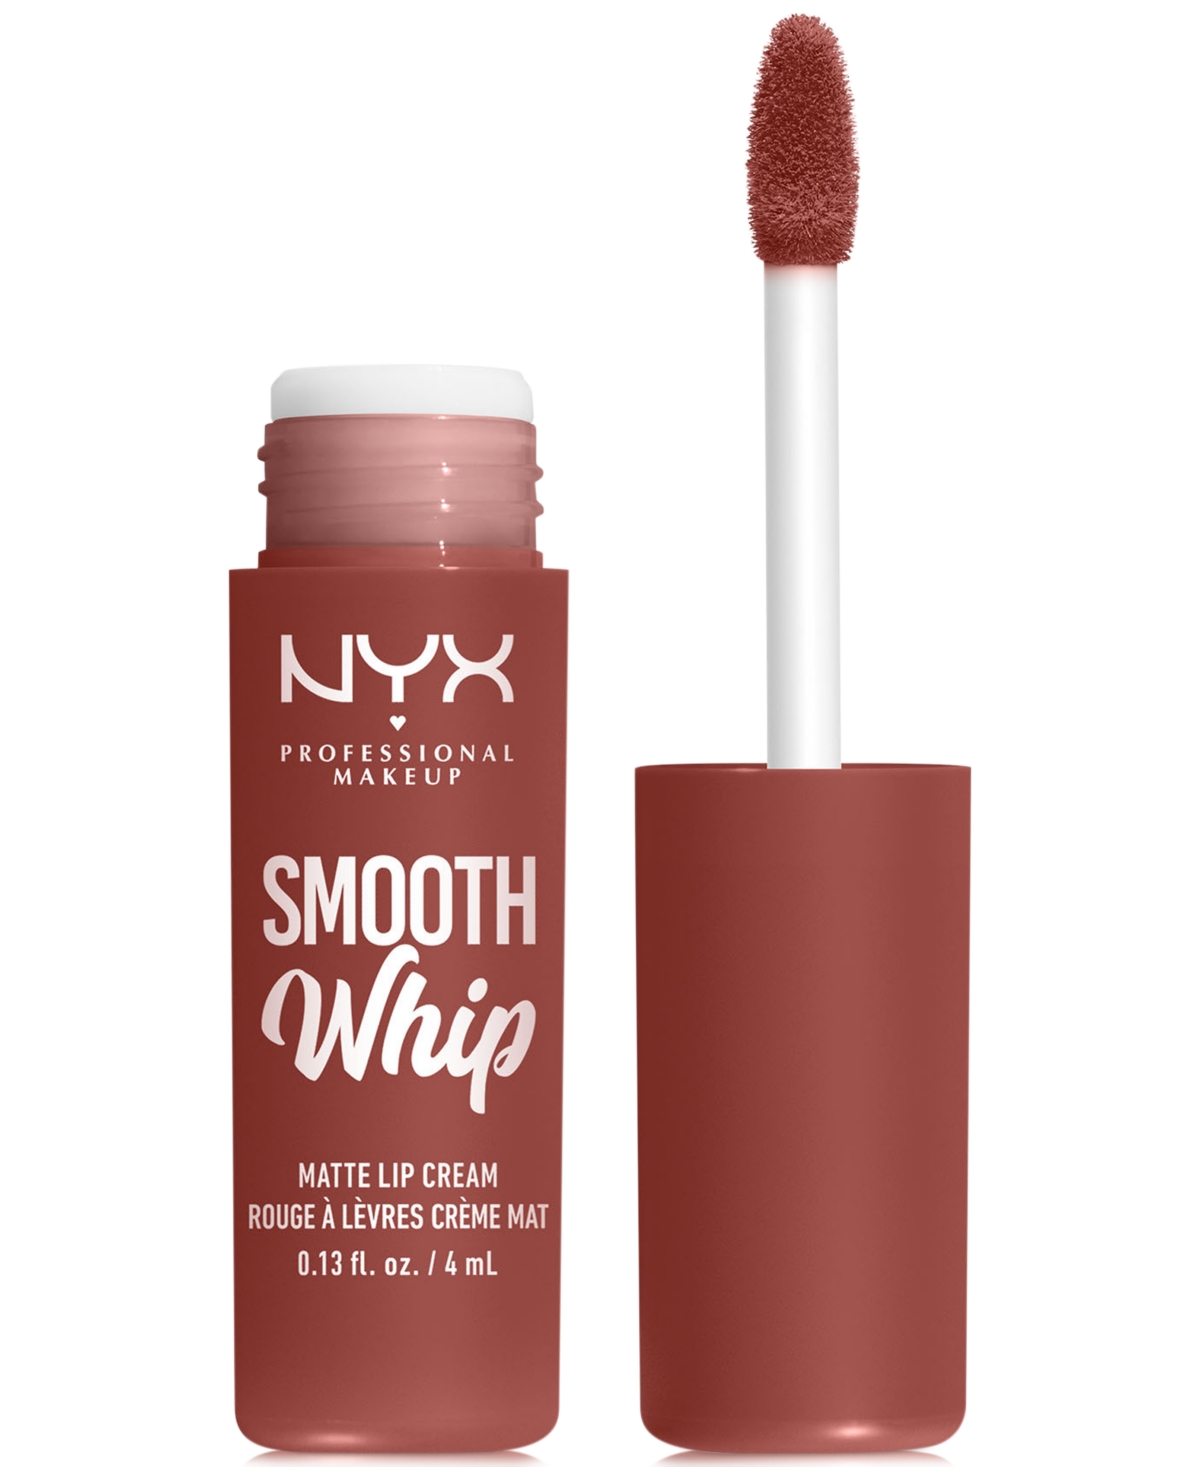 Nyx Professional Makeup Smooth Whip Matte Lip Cream In Latte Foam